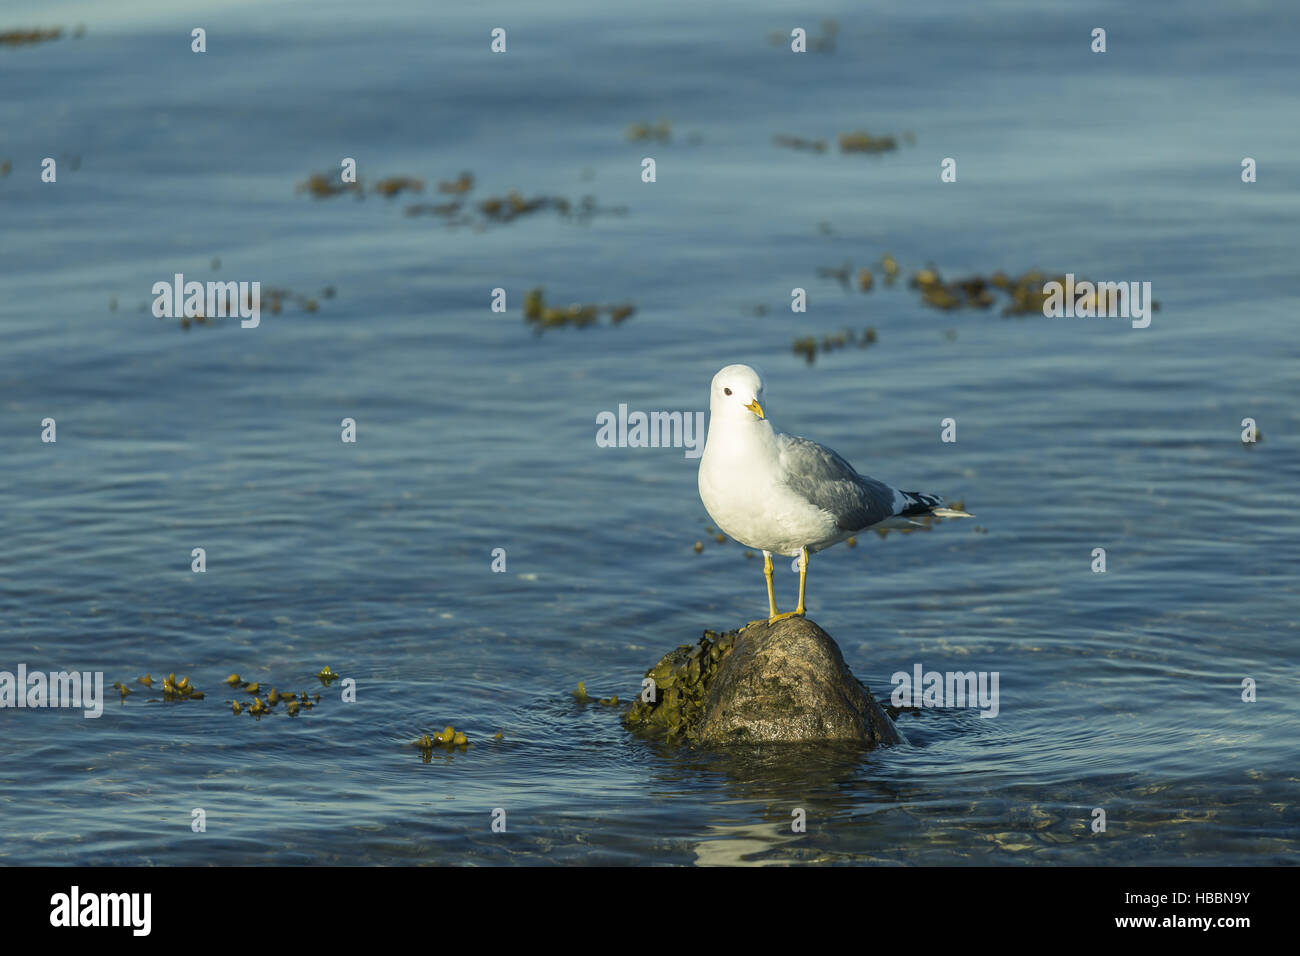 A seagull standing on a stone Stock Photo